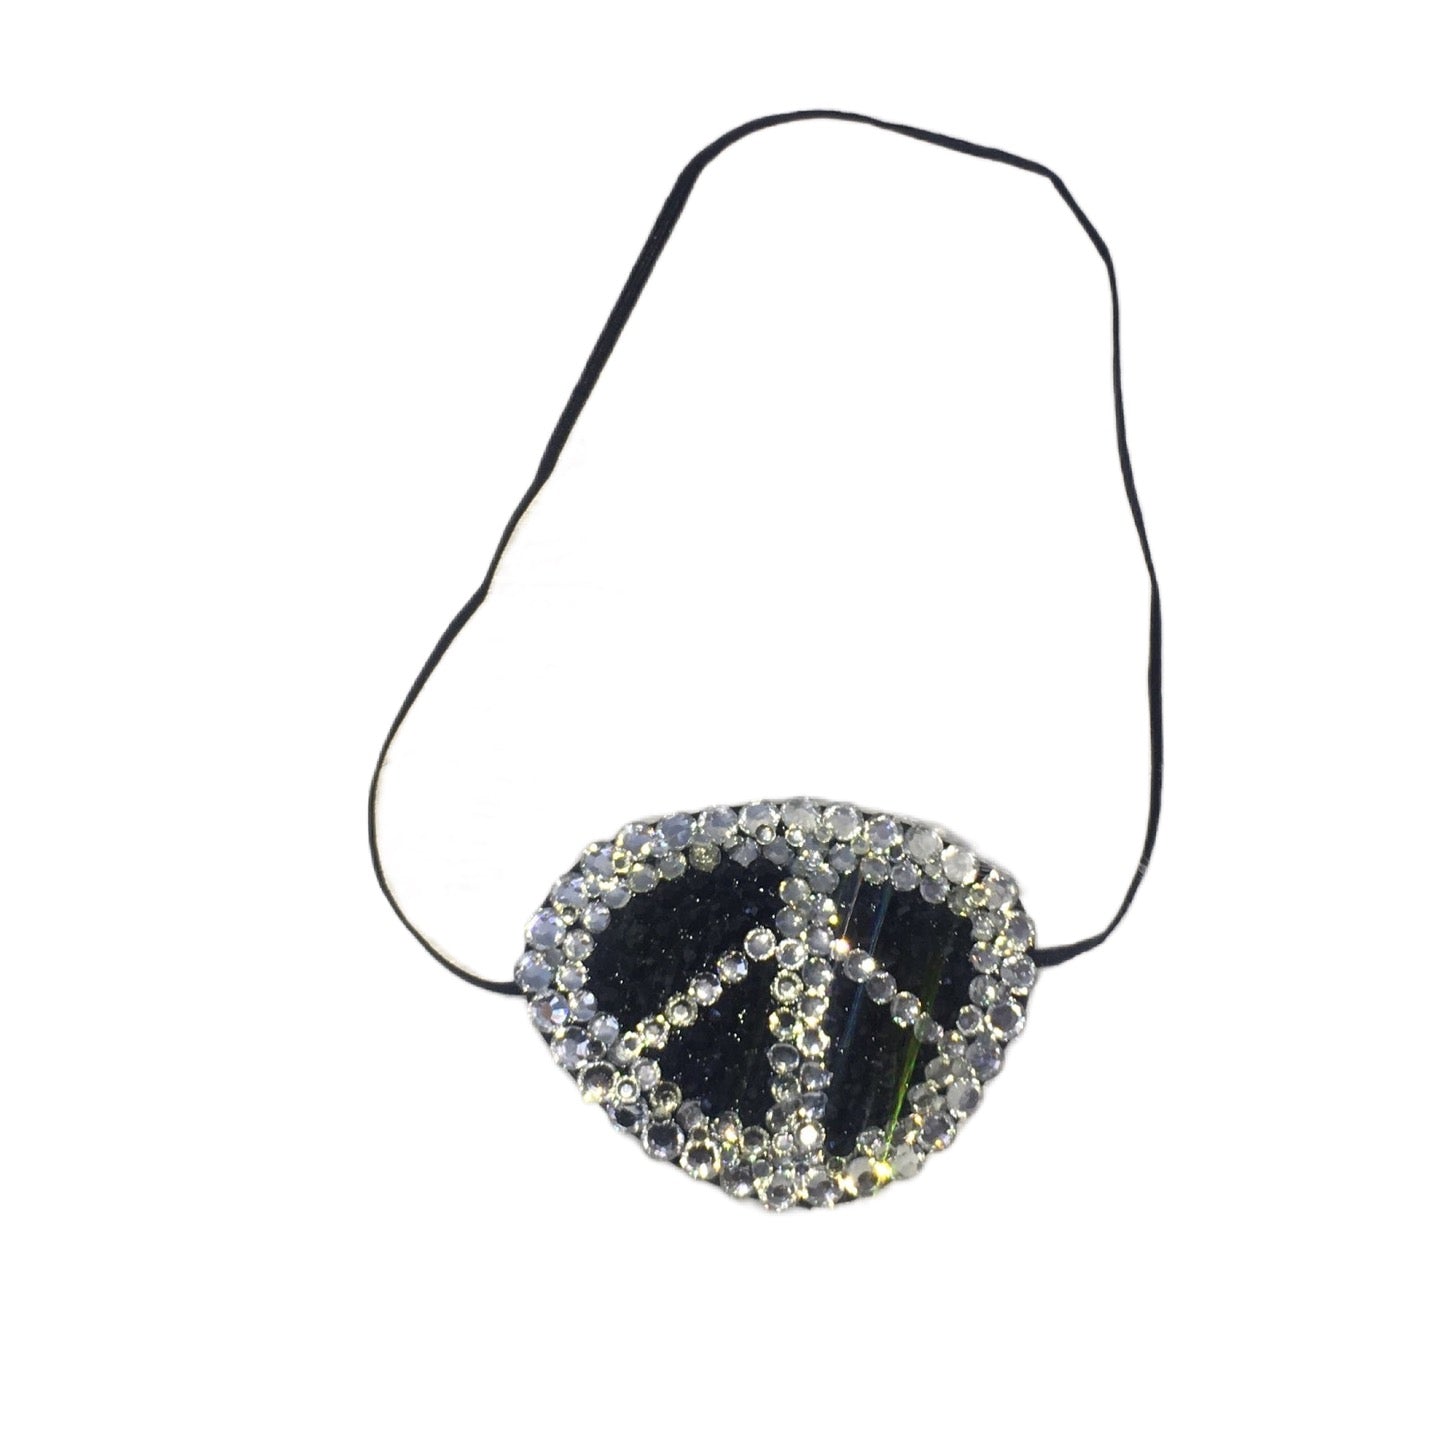 Black Eye Patch Bedazzled In Jet Black & Crystals "Peace"